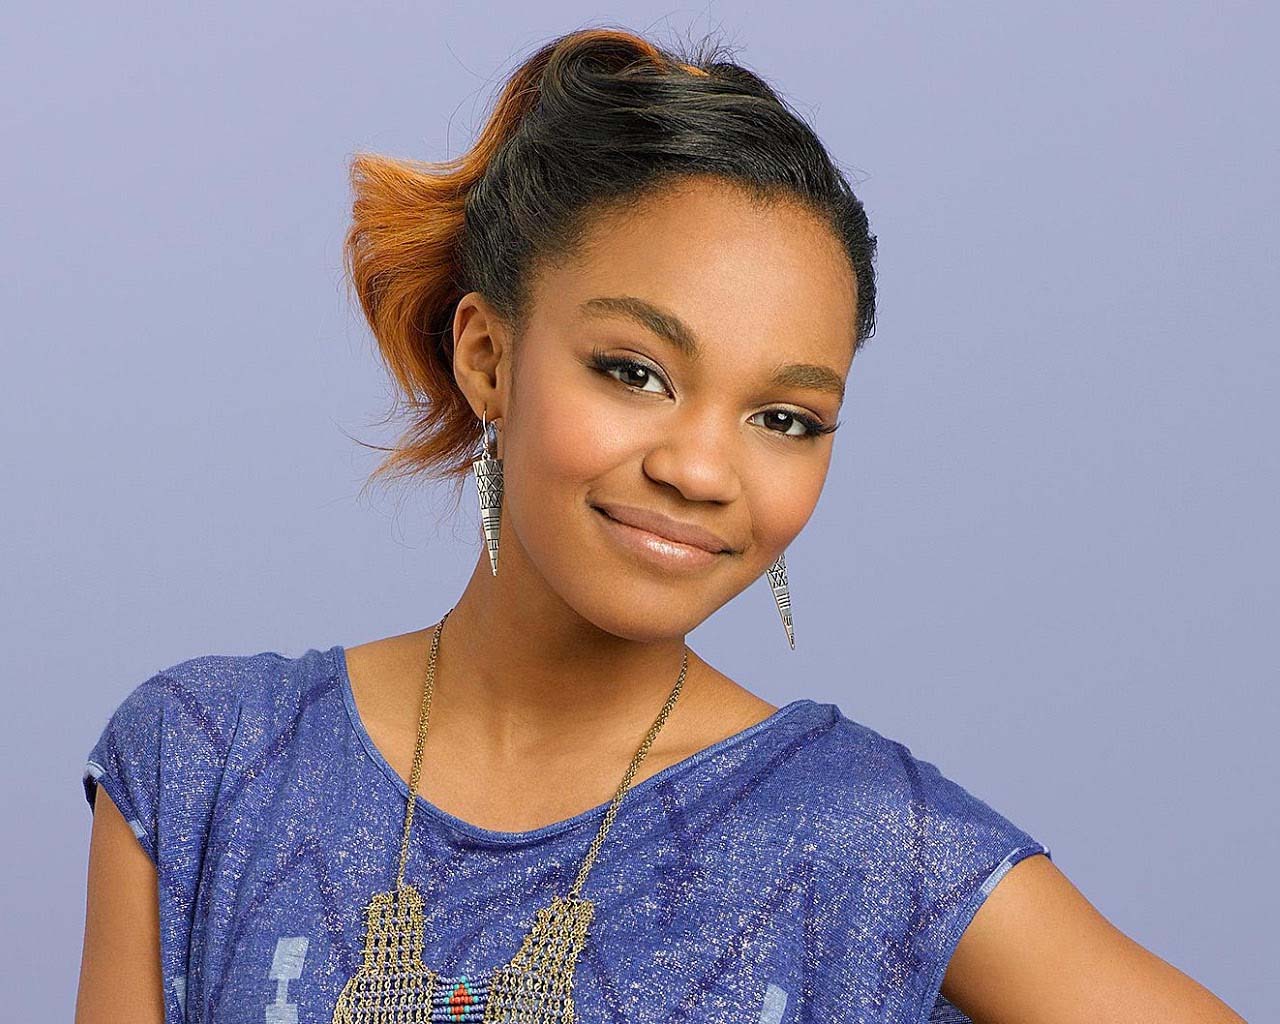 View, Print or Free Download China Anne McClain Full Size Full HD 7 Wallpap...